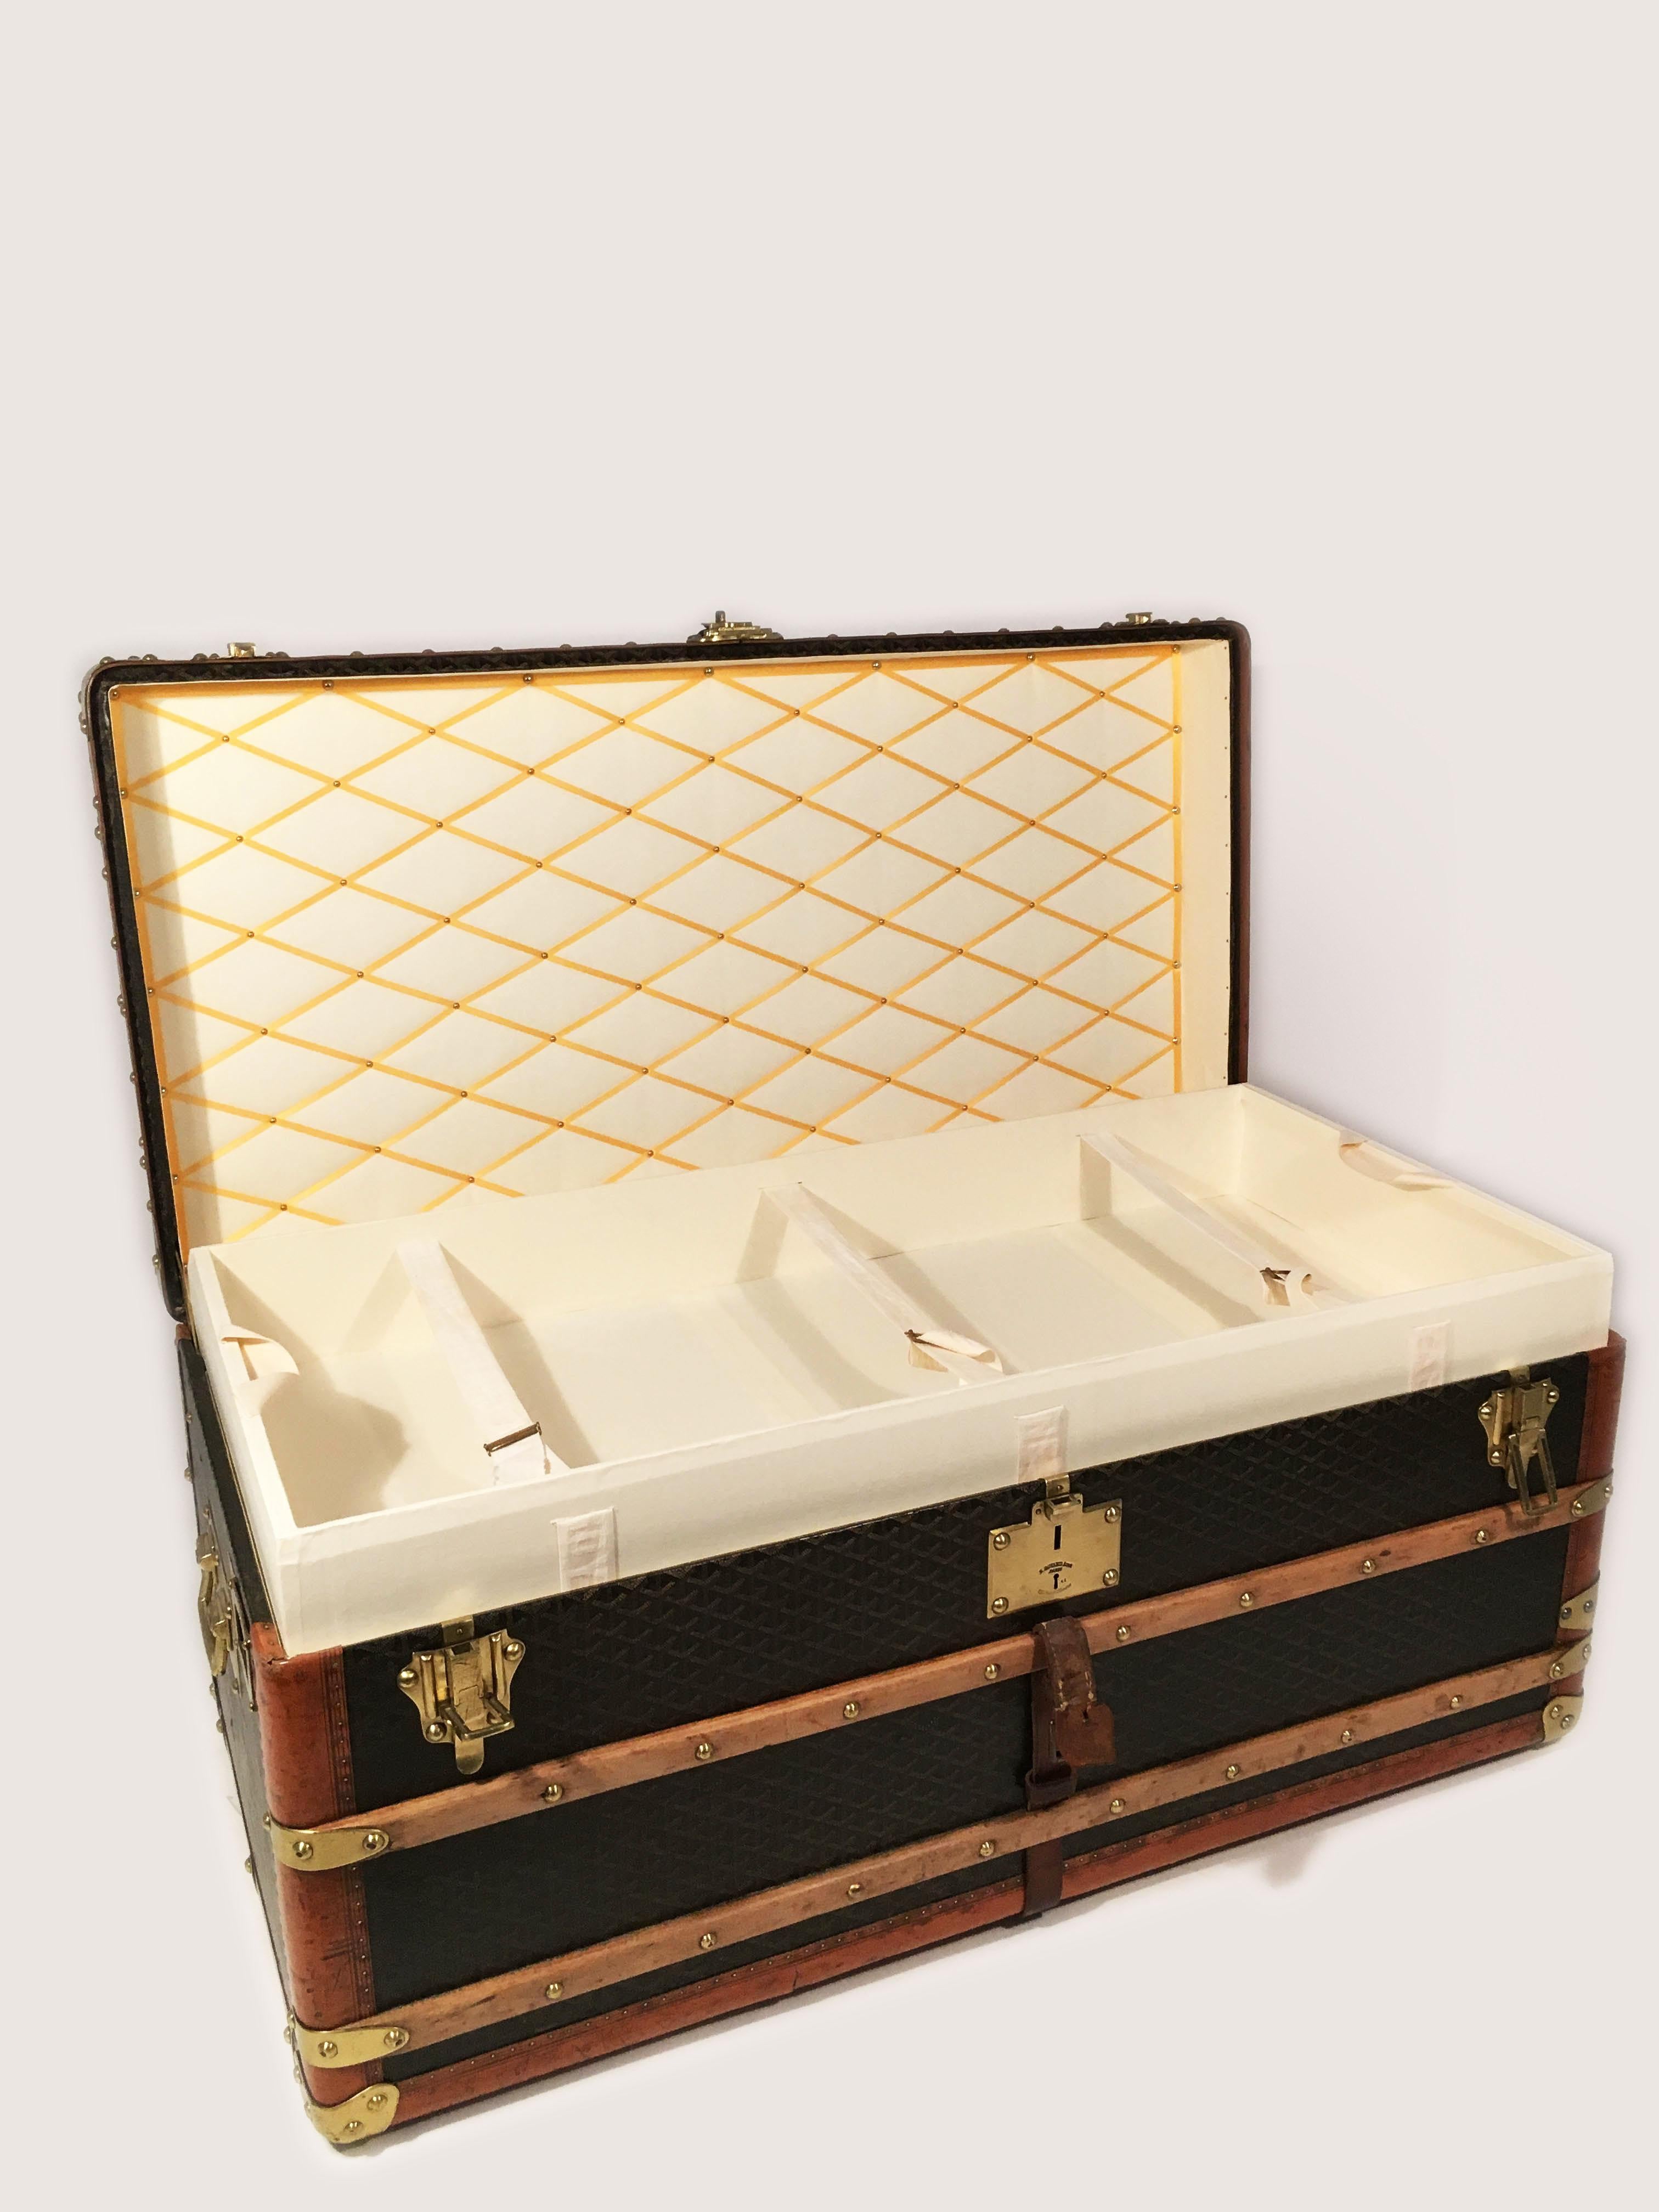 Goyard Steamer Trunk from the Princely House of Thurn and Taxis For Sale 9